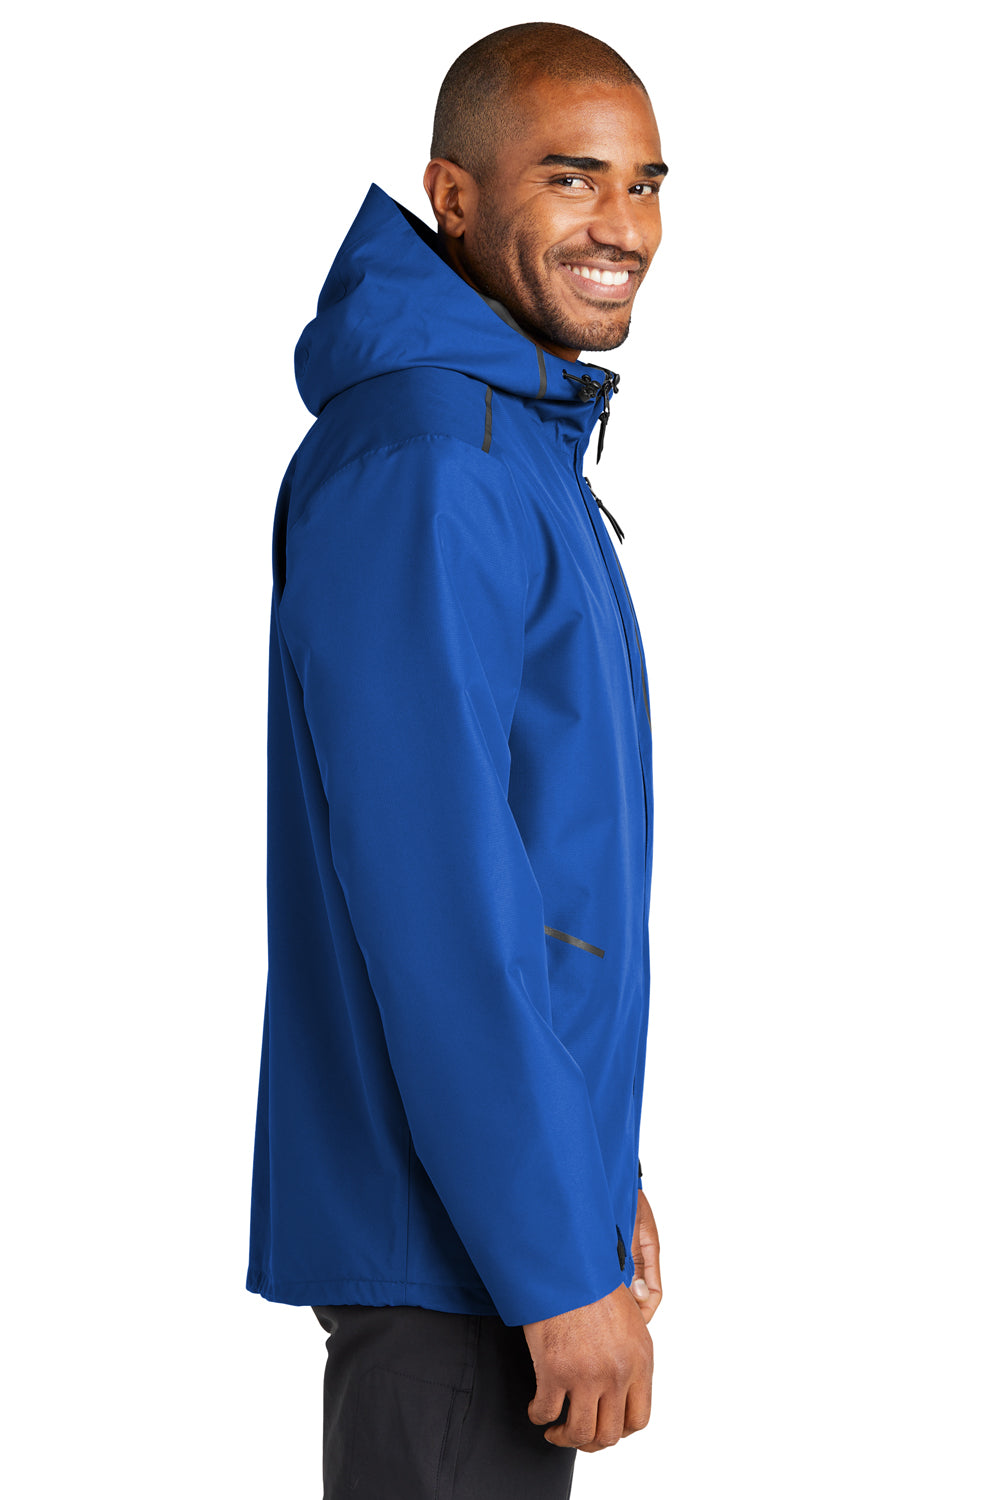 Port Authority J920 Collective Tech Full Zip Outer Shell Hooded Jacket True Royal Blue Side